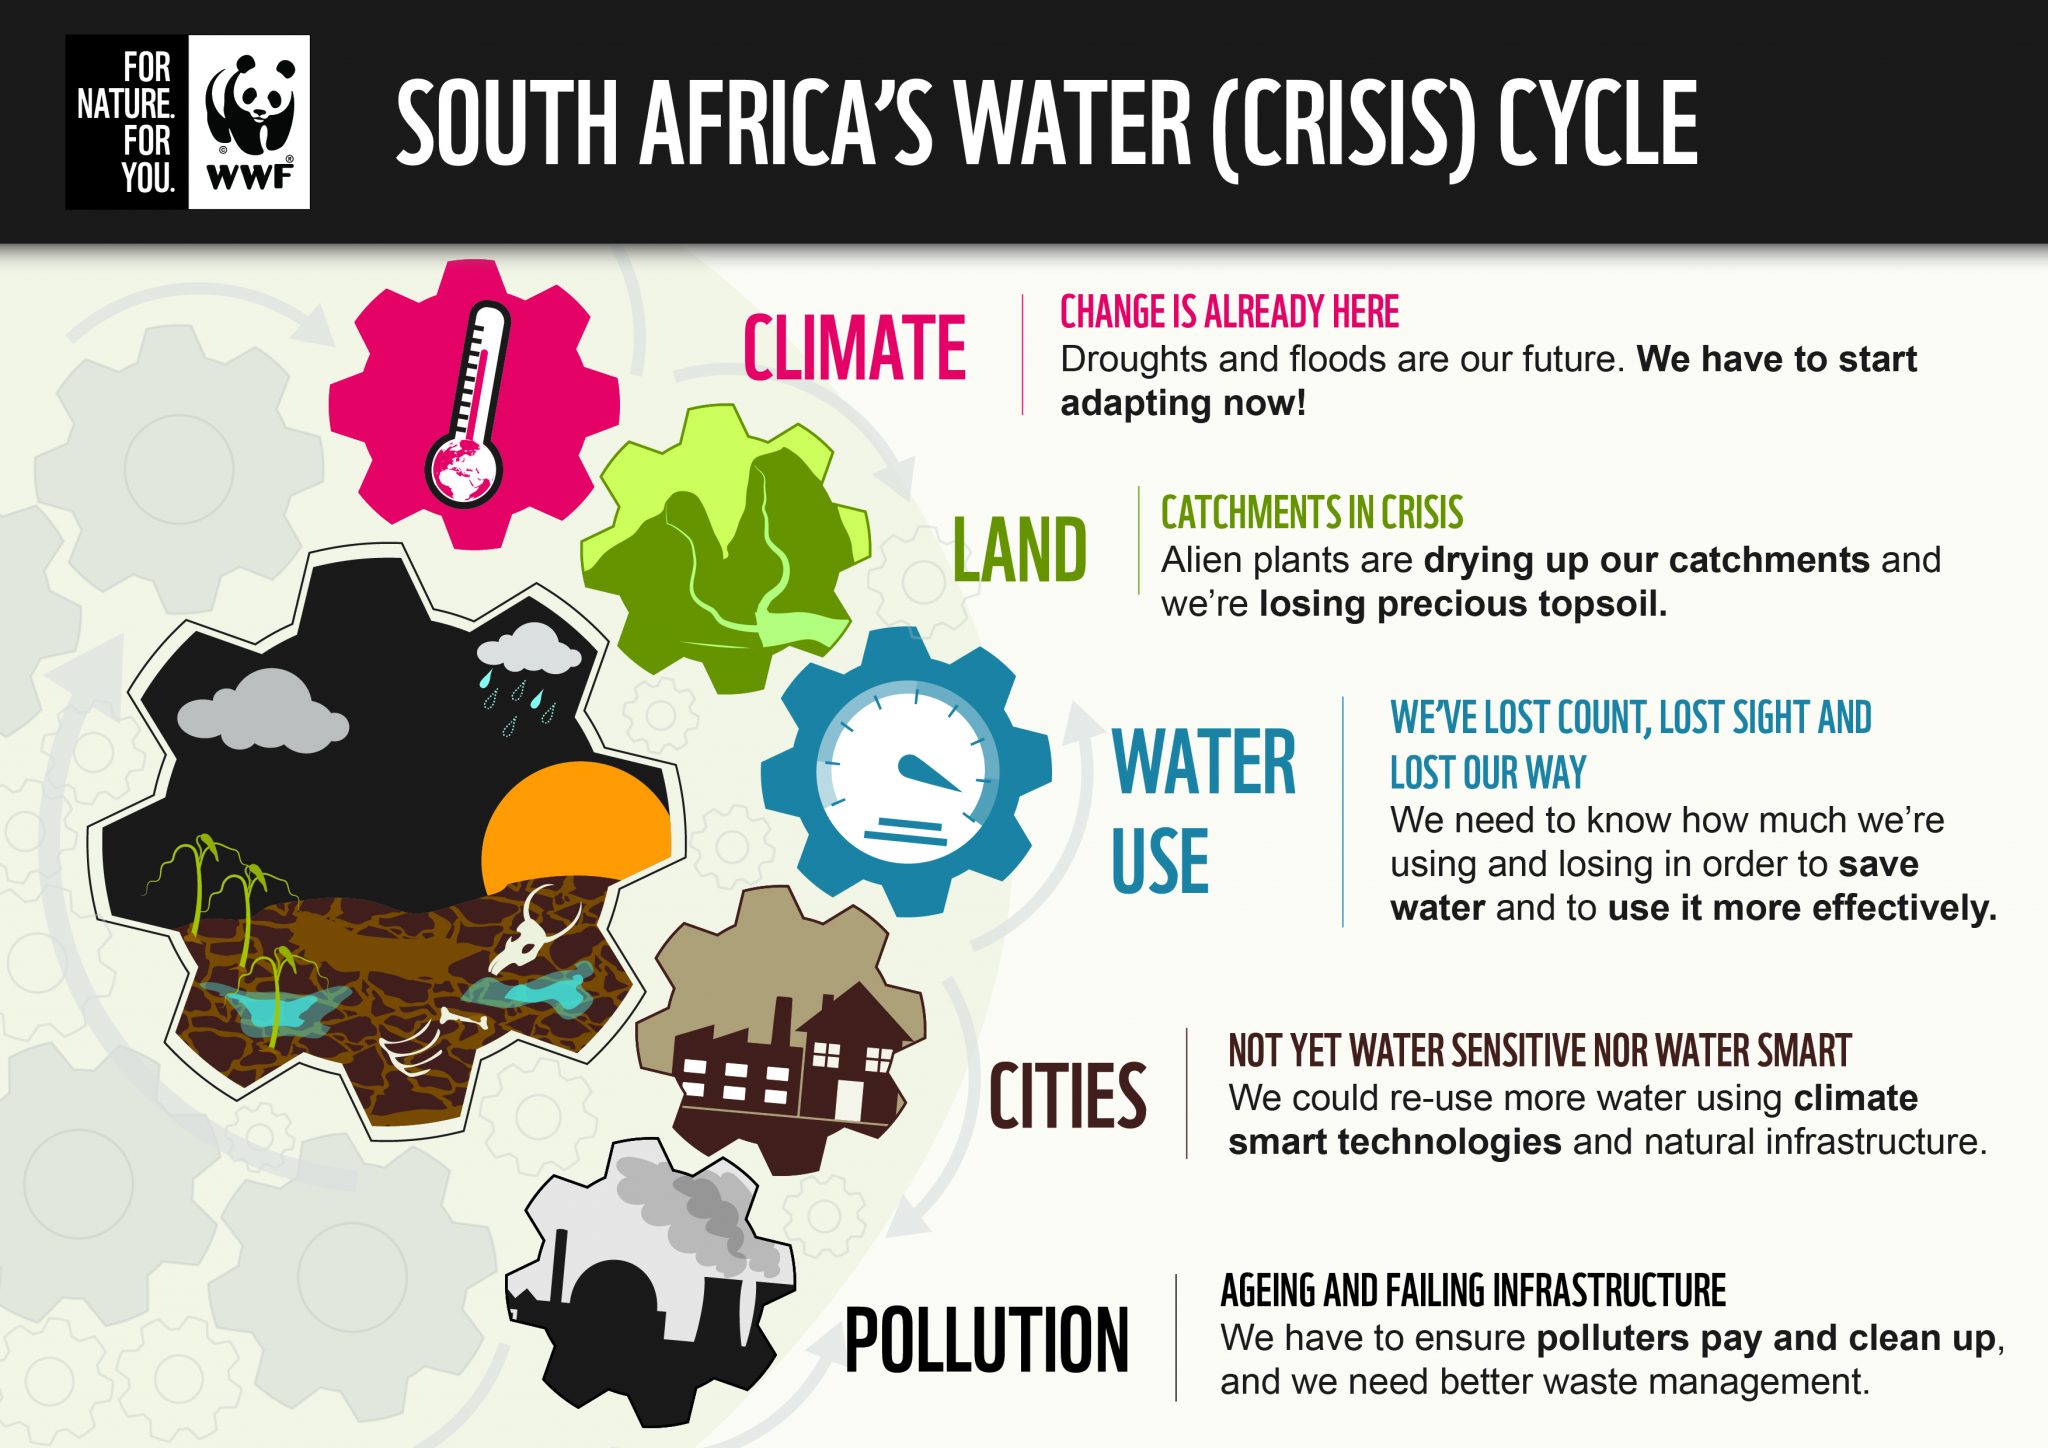 water crisis in south africa essay